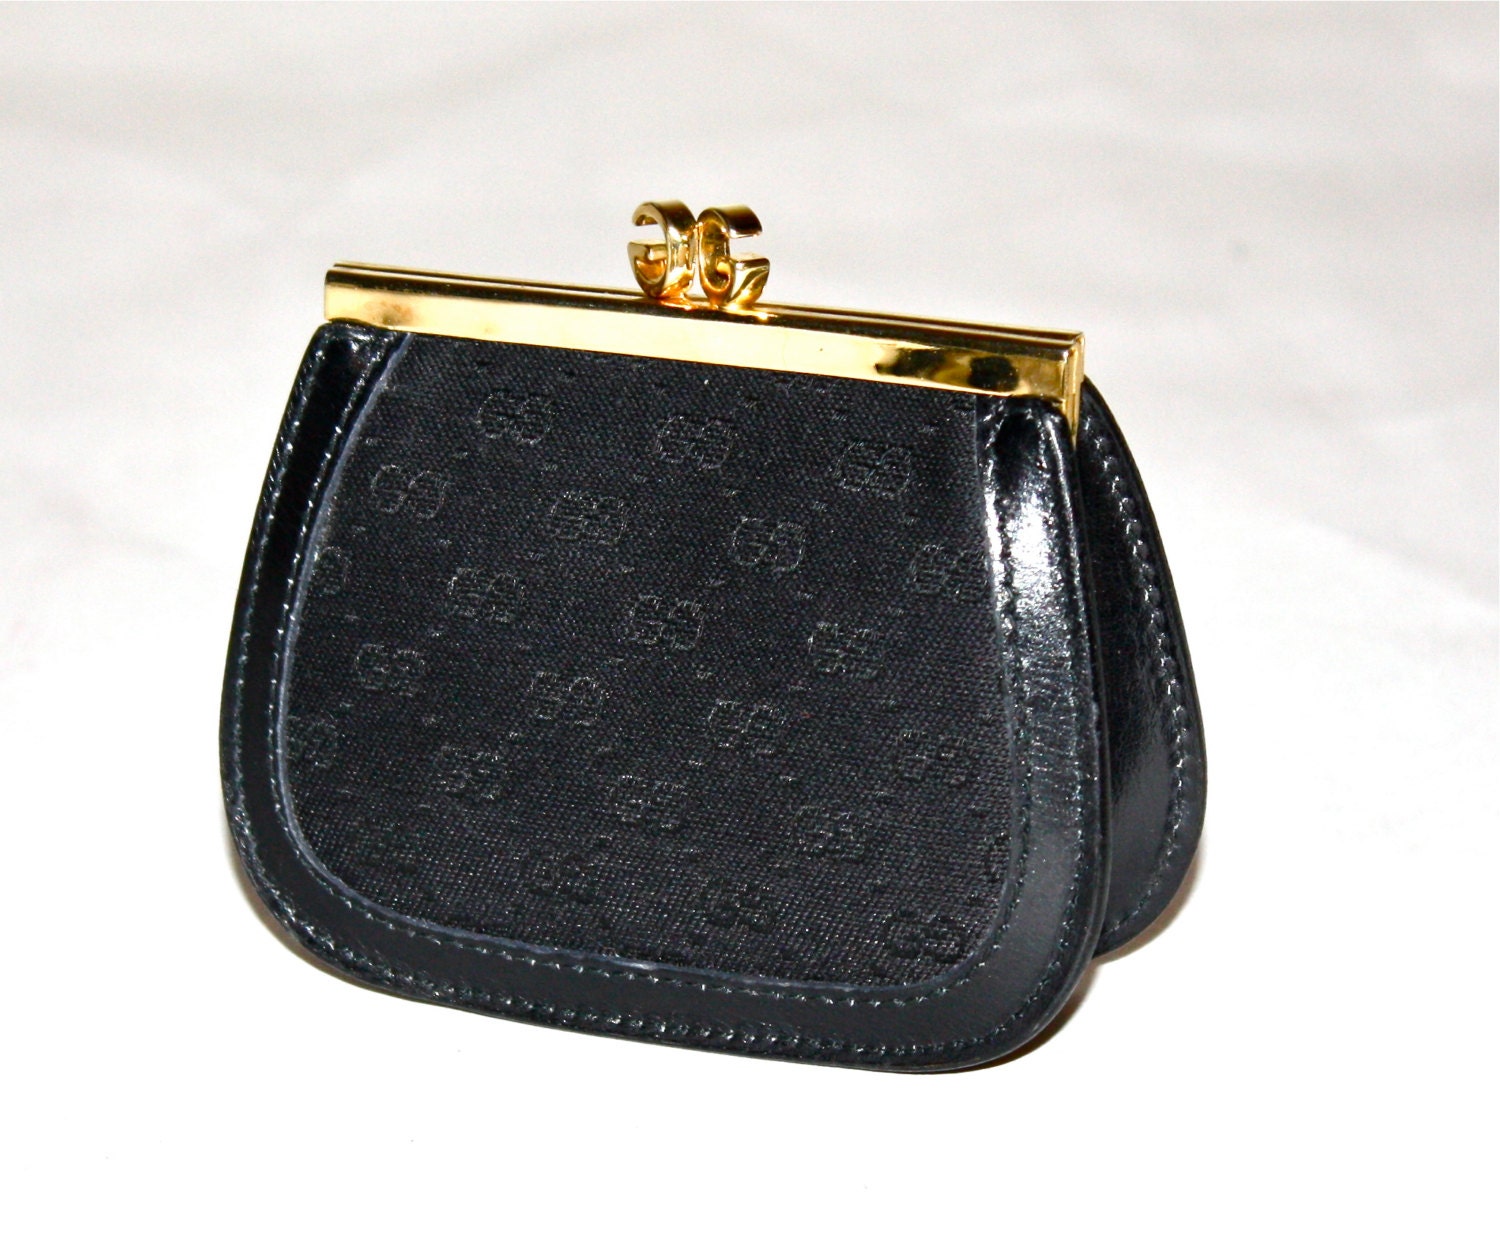 Vintage GUCCI Coin Purse Black Monogrammed Canvas by StatedStyle